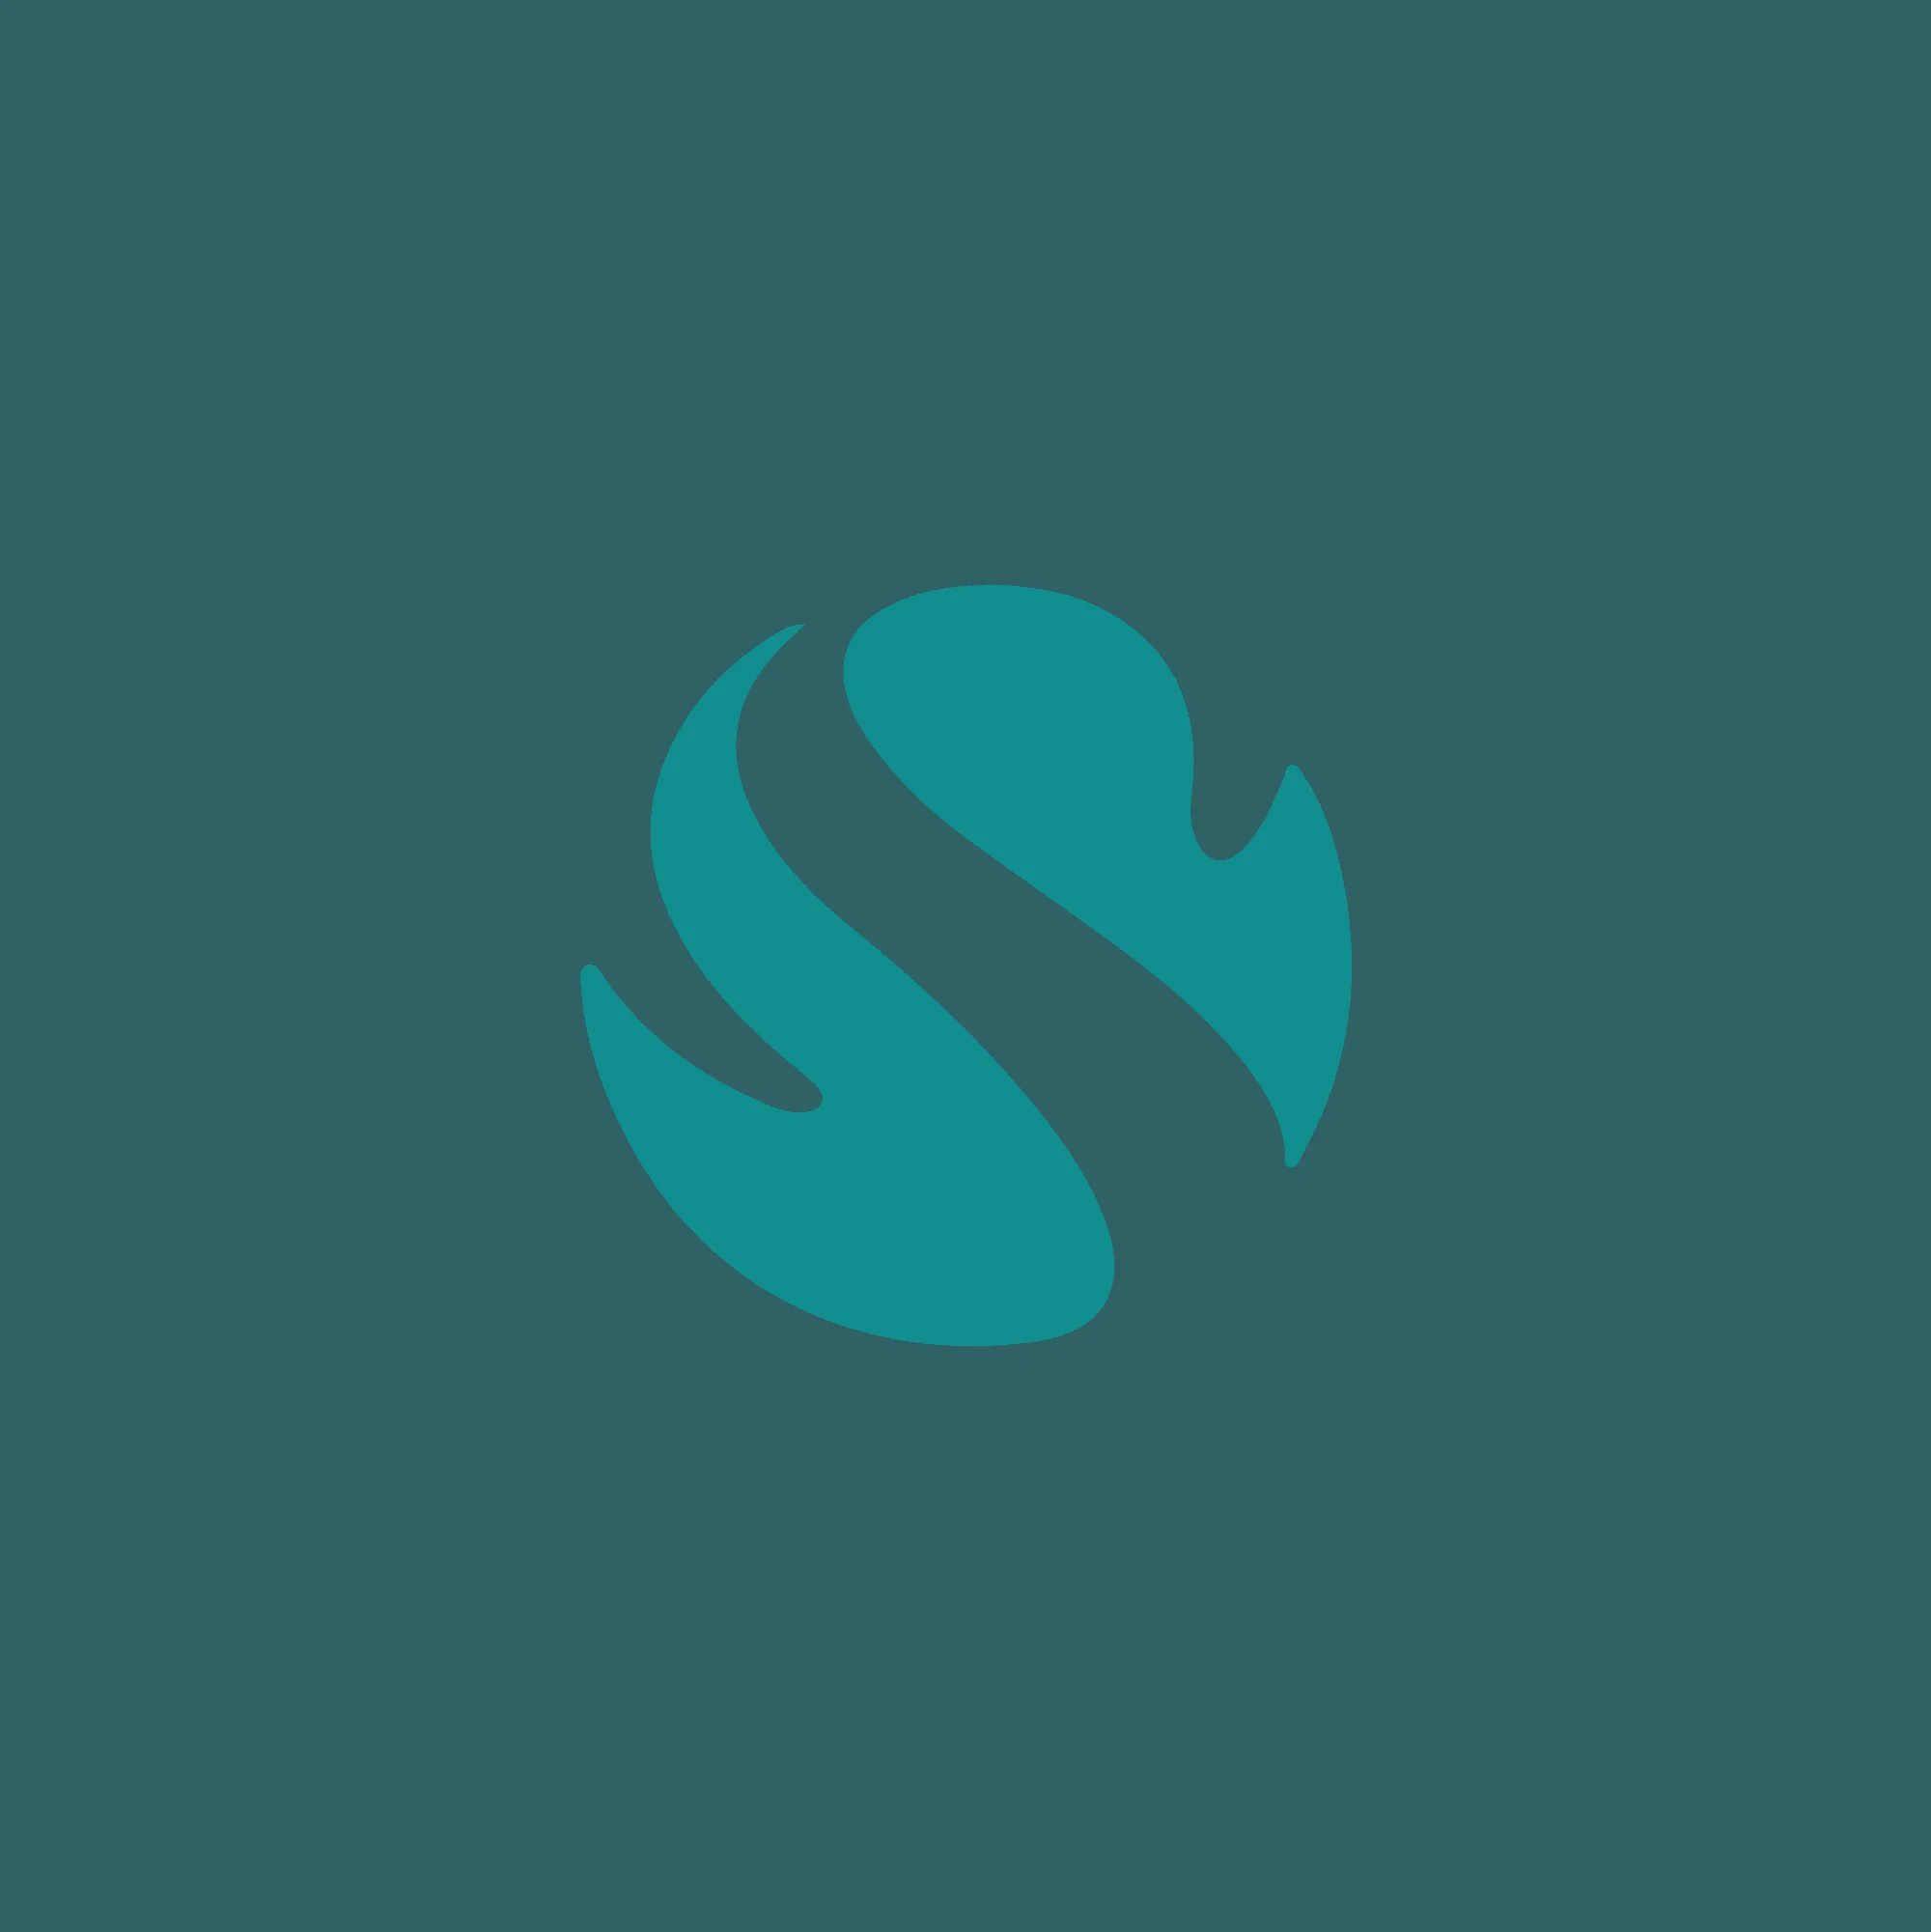 Branding logo seign letter S, in a swan round shape, turquoise